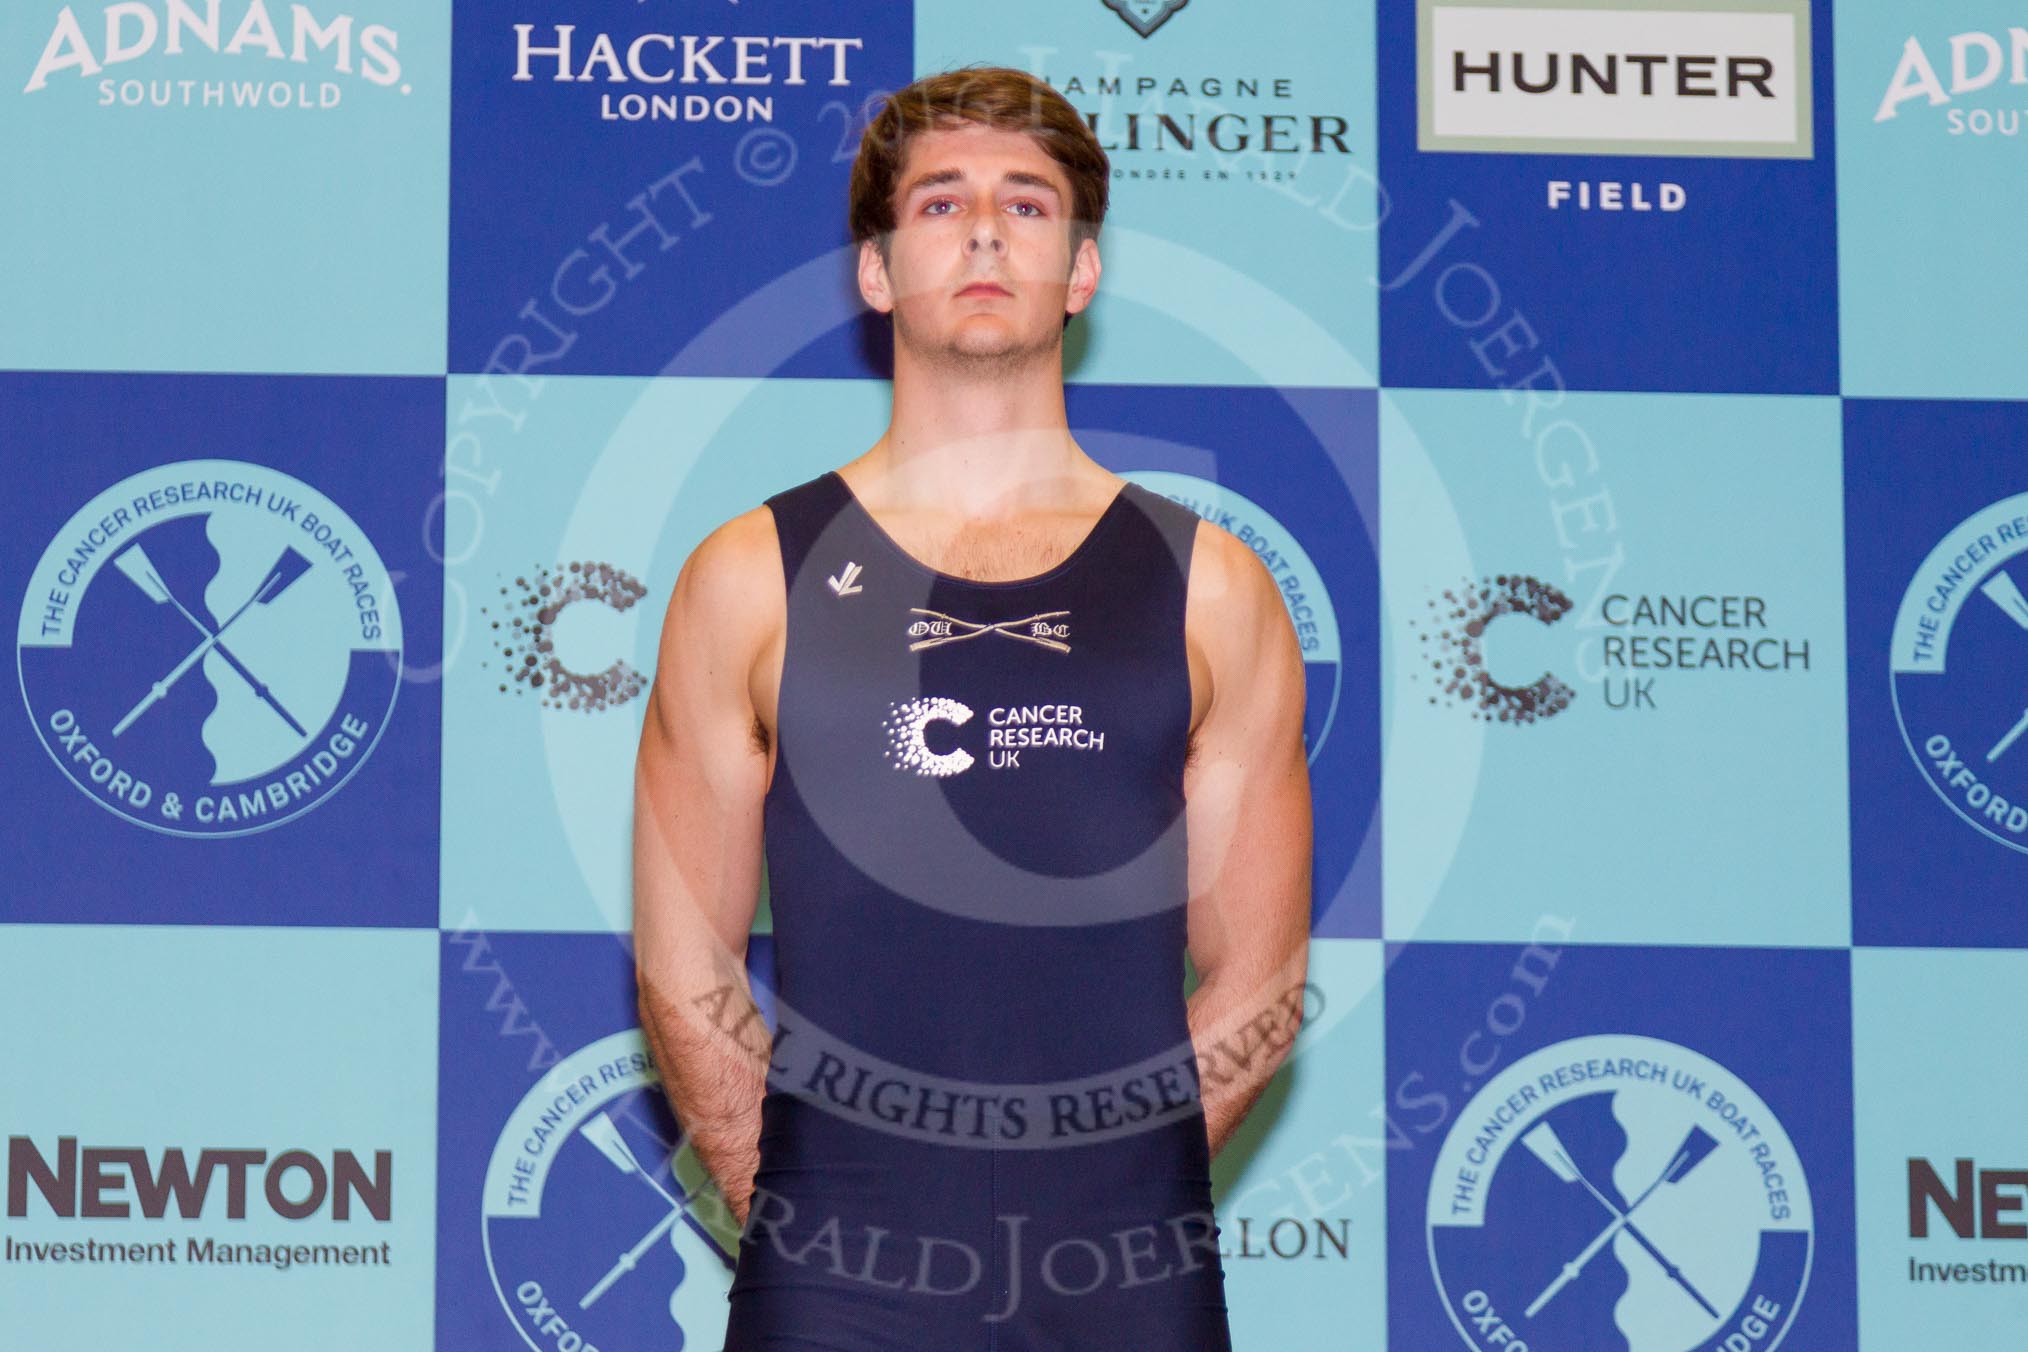 The Boat Race season 2016 - Crew Announcement and Weigh-In: The Boat Race, 2 seat: Oxford: James White – 87.0kg.
Westmister Hall, Westminster,
London SW11,

United Kingdom,
on 01 March 2016 at 10:19, image #56